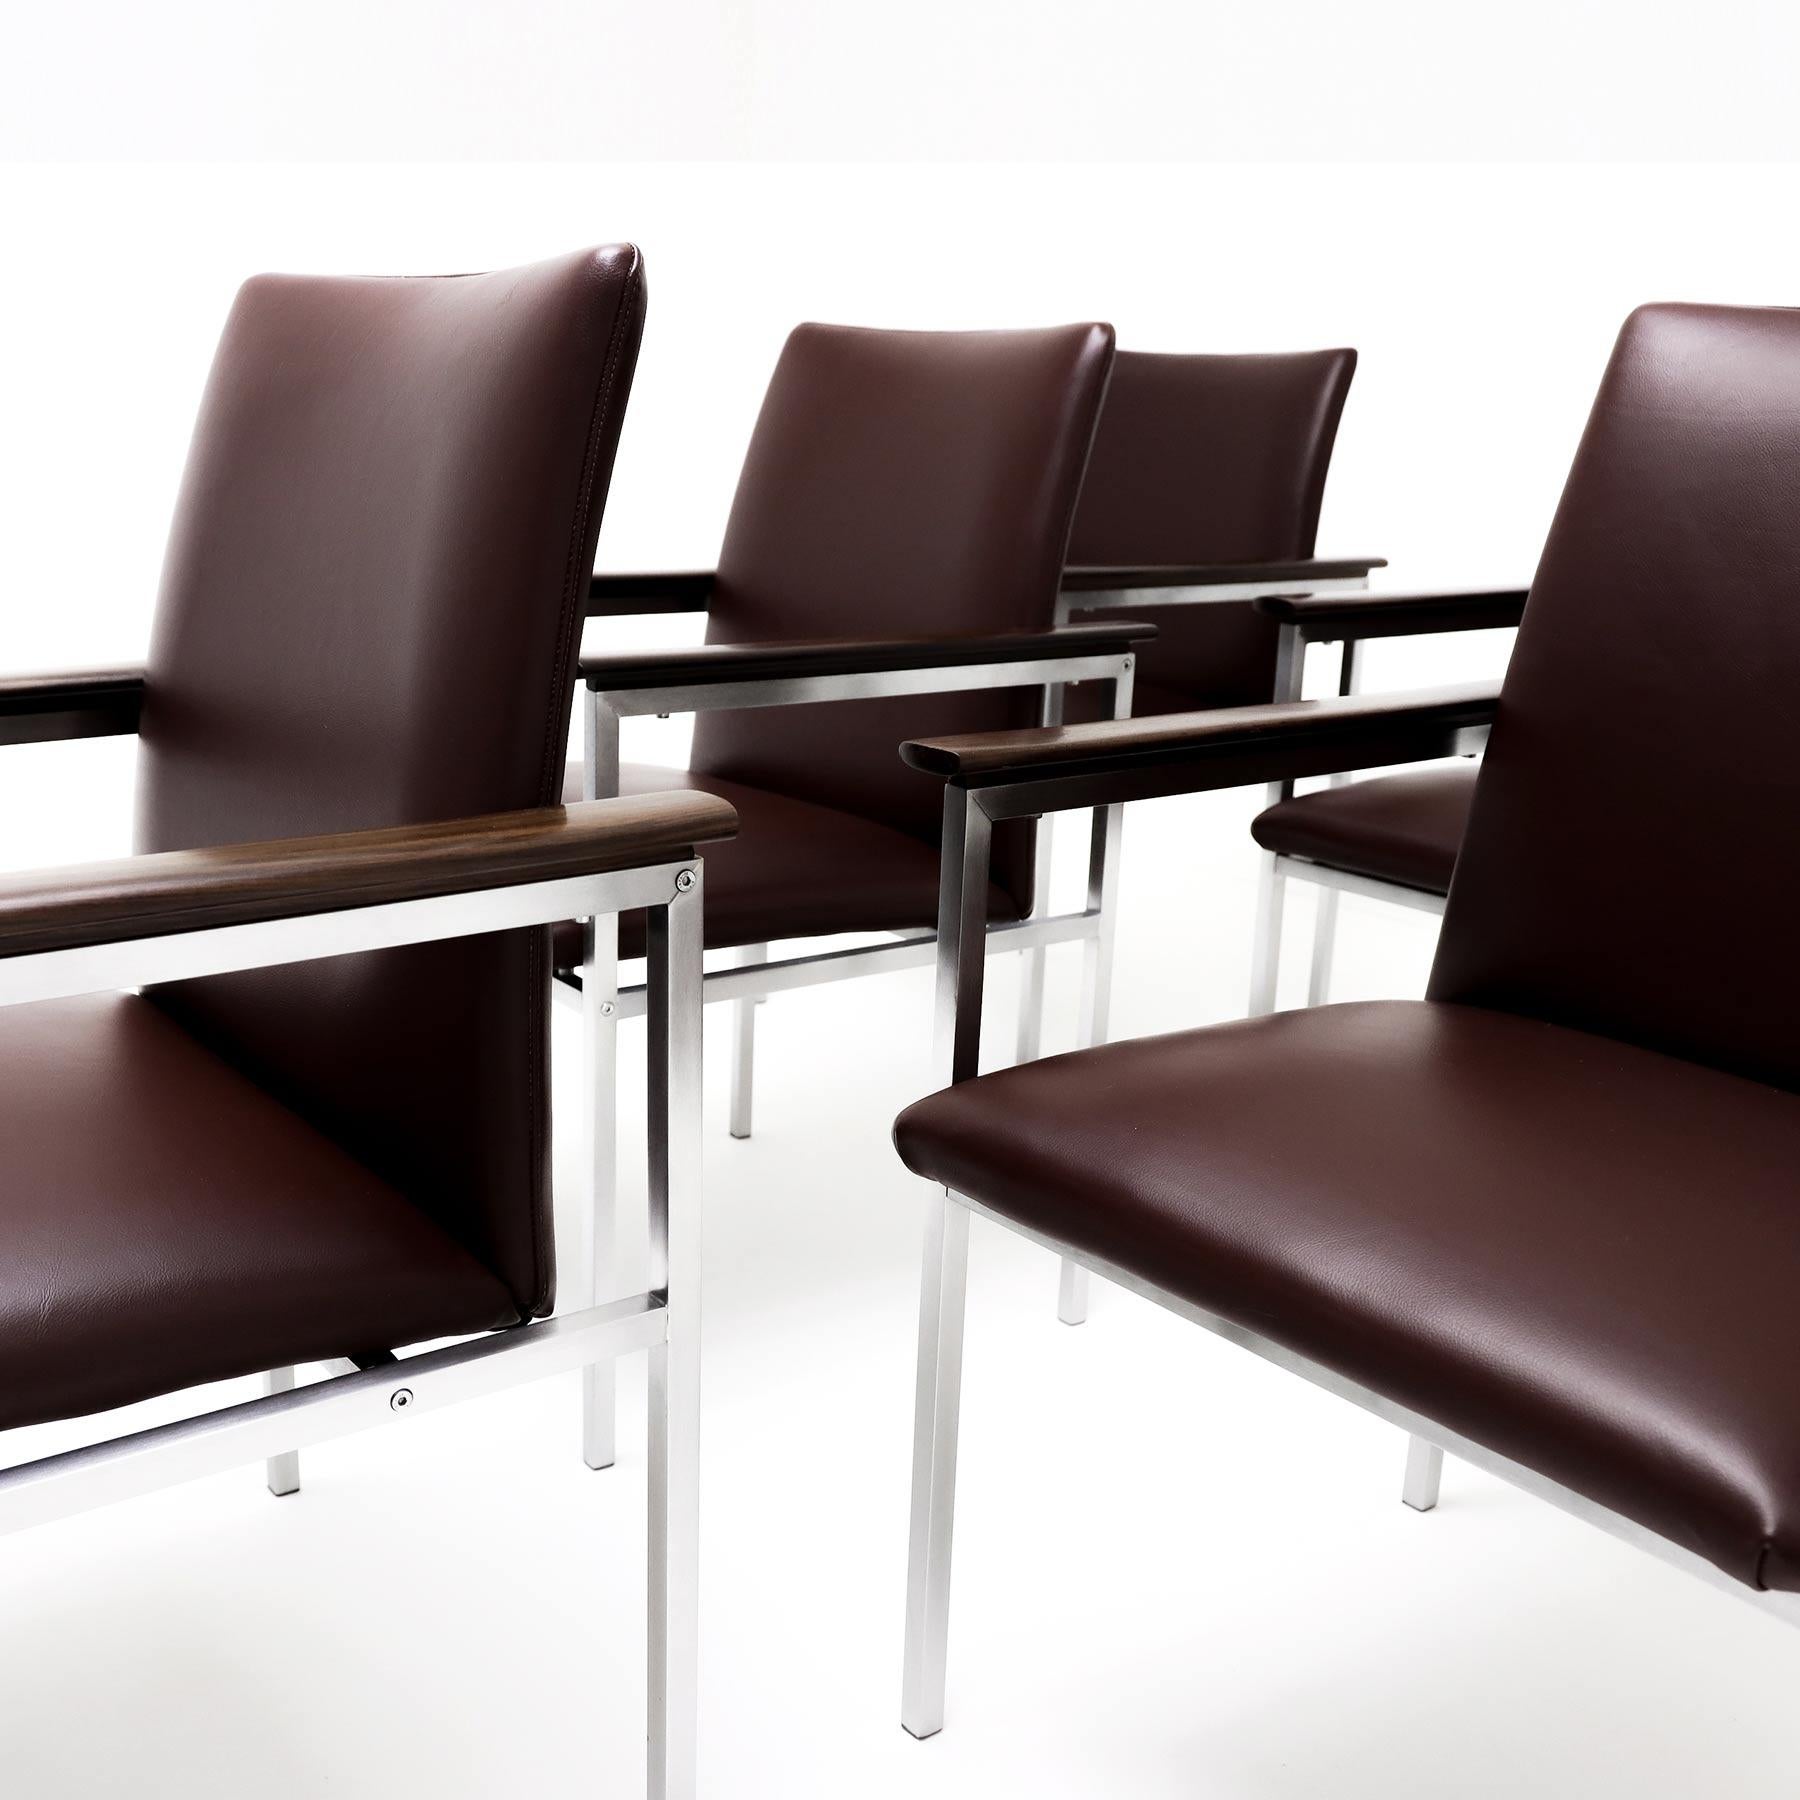 6 Sigvard Bernadotte H-line chairs in brushed steel, Walnut and leather In Good Condition For Sale In Highclere, Newbury